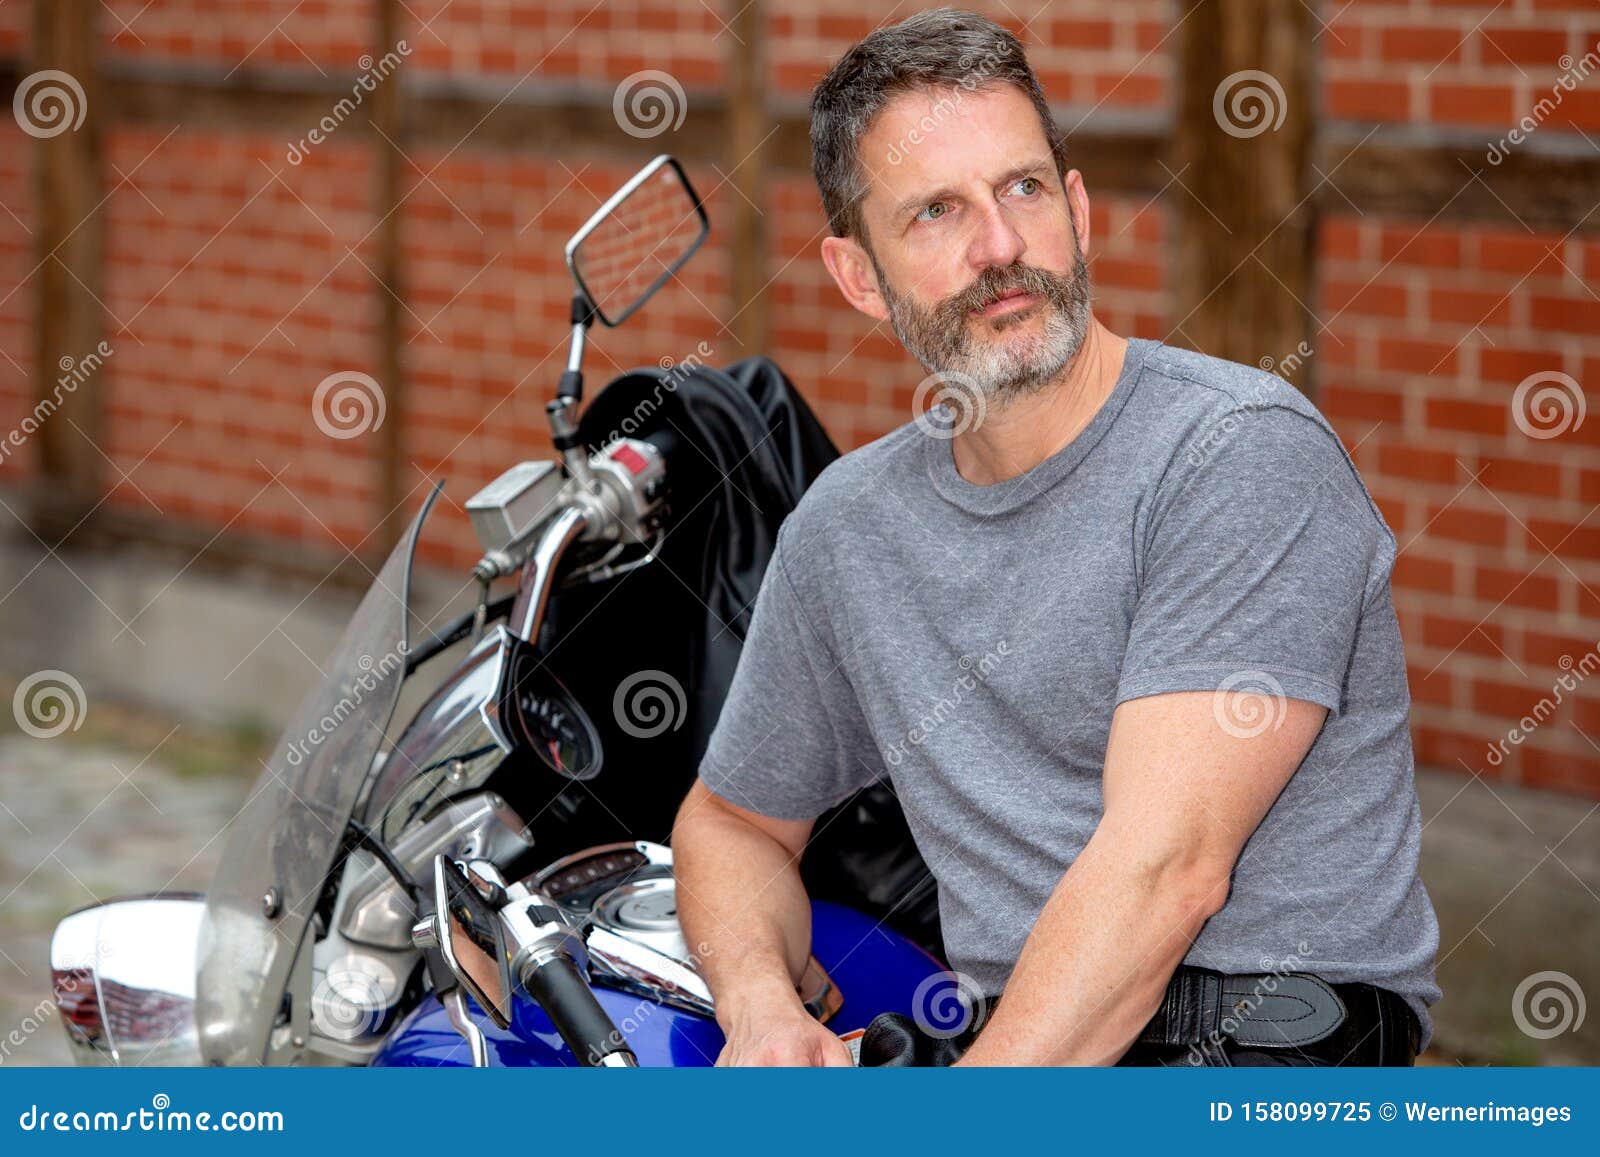 Handsome Man Sitting on His Bike Outdoors Stock Image - Image of ...